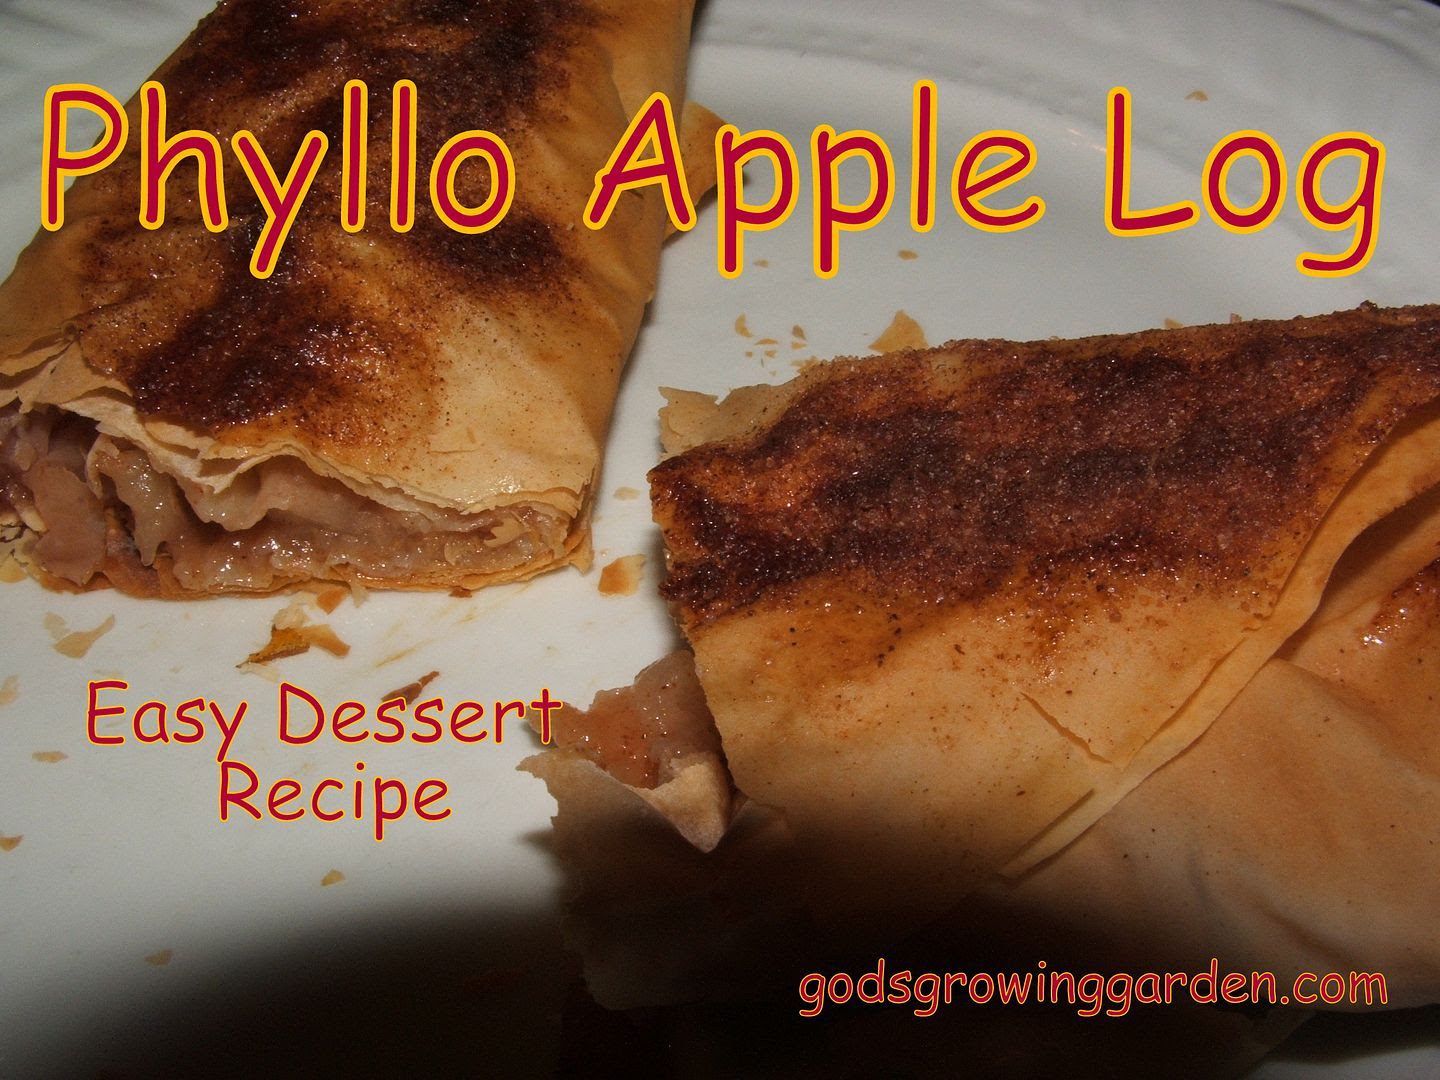 Phyllo Apple Logs by Angie Ouellette-Tower for godsgrowinggarden.com photo 013_zpscb189a76.jpg